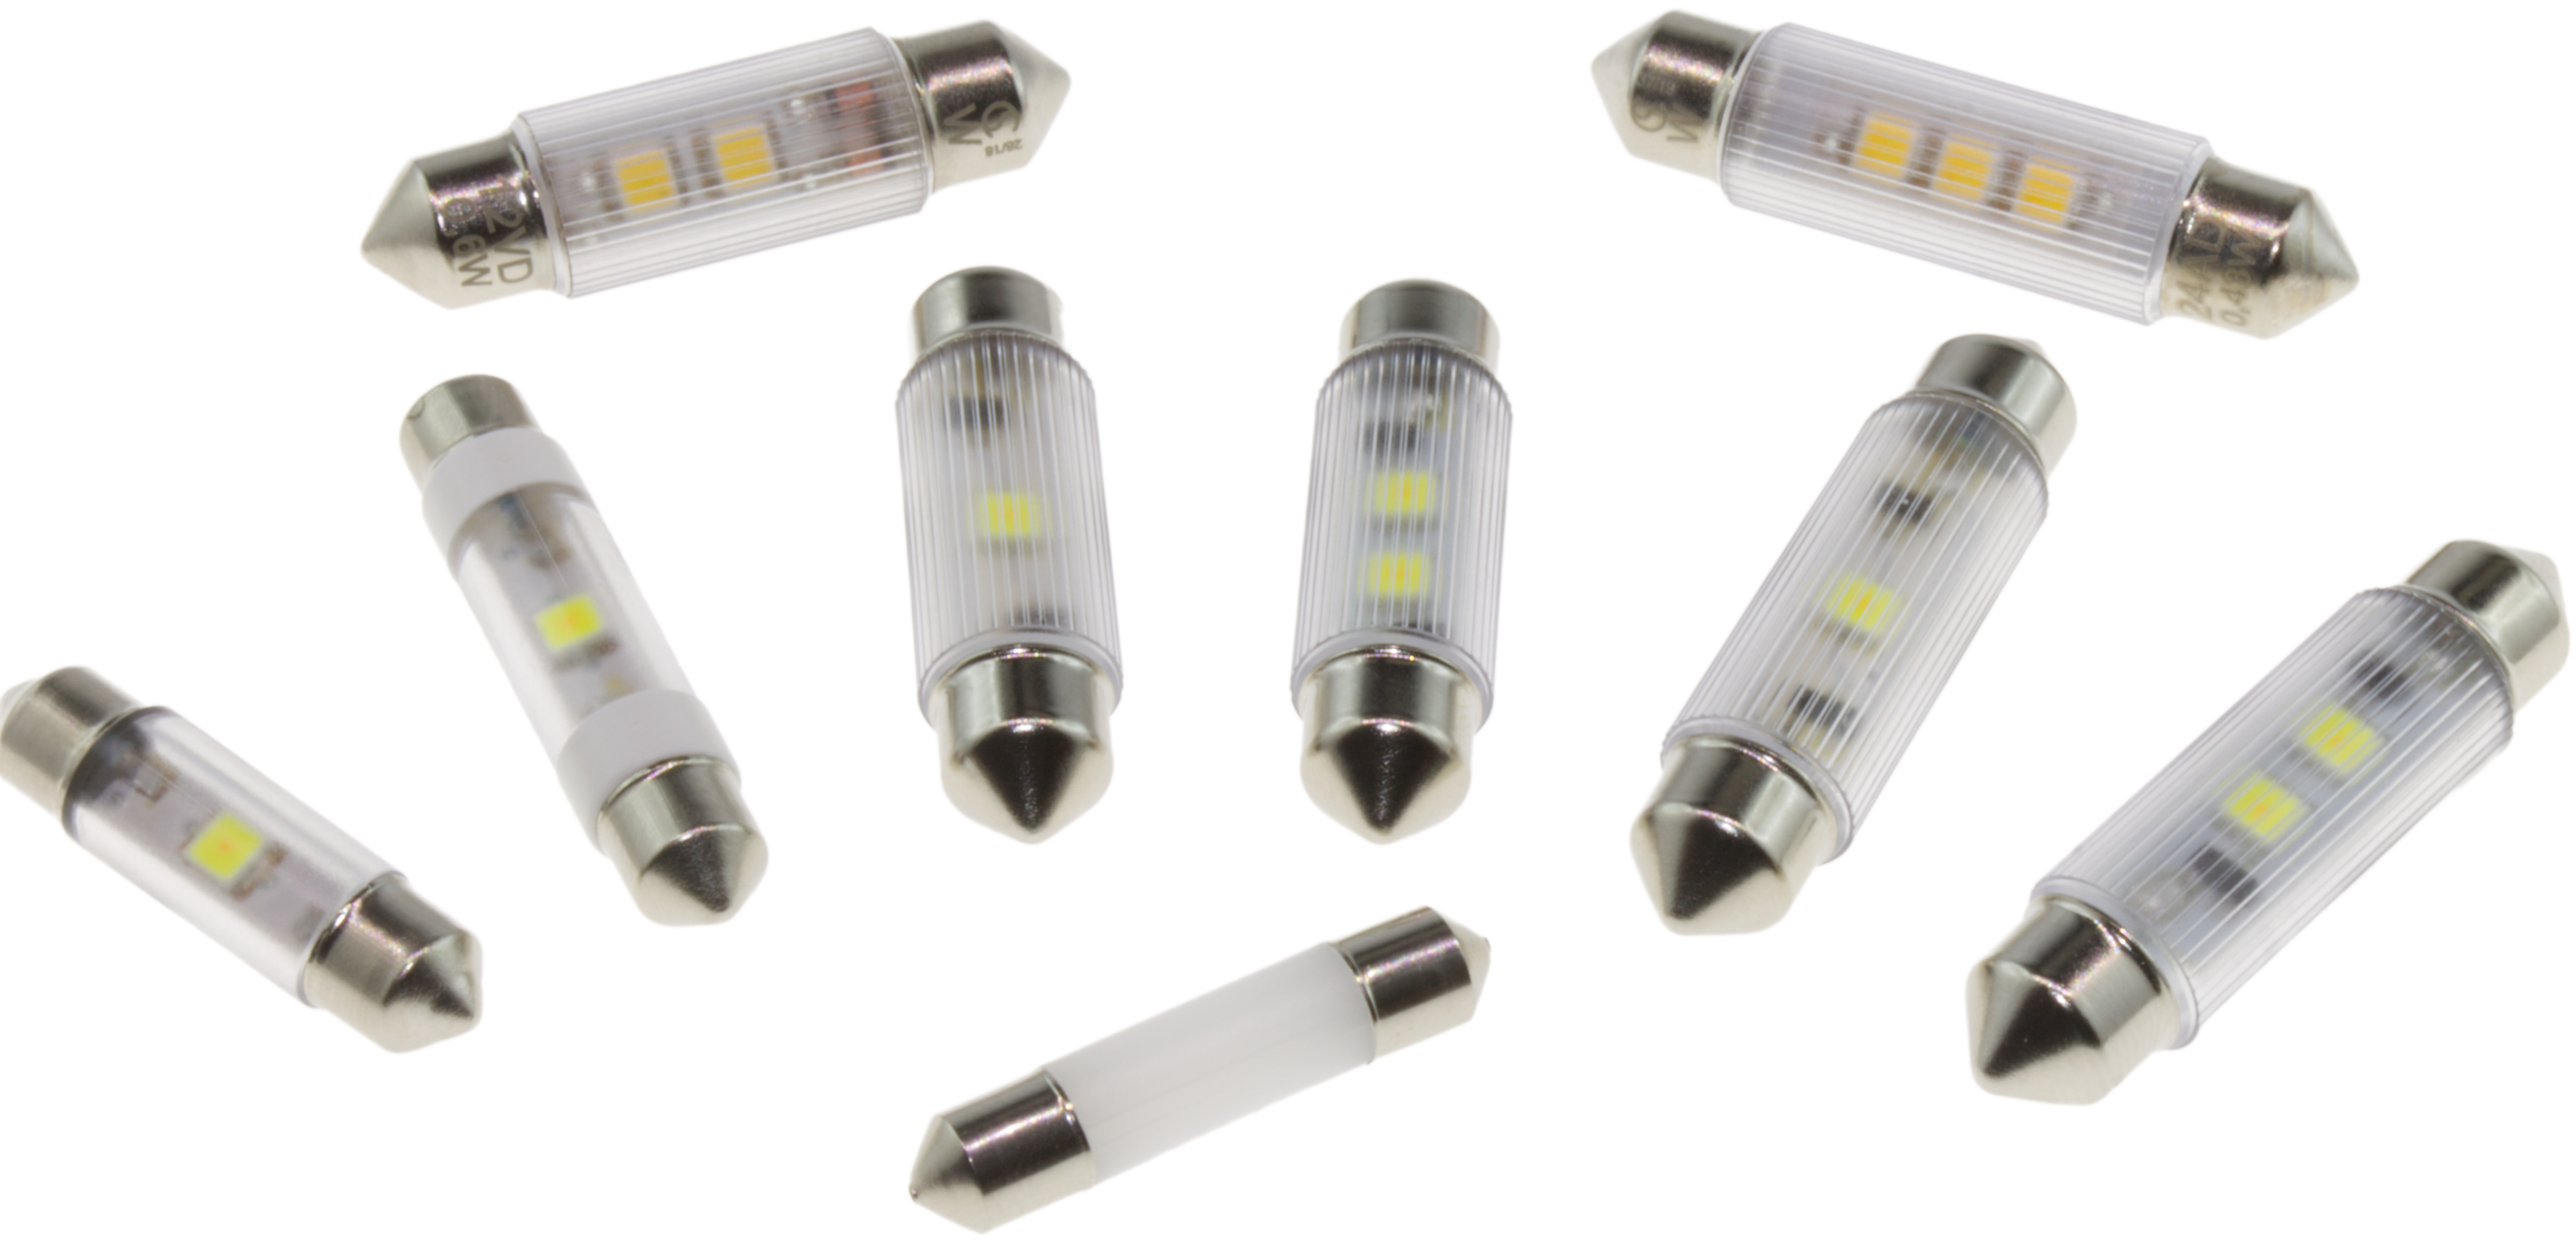 LED-based festoon lamps in the dimensions Ø 6 x 31 and 6 x 39 mm